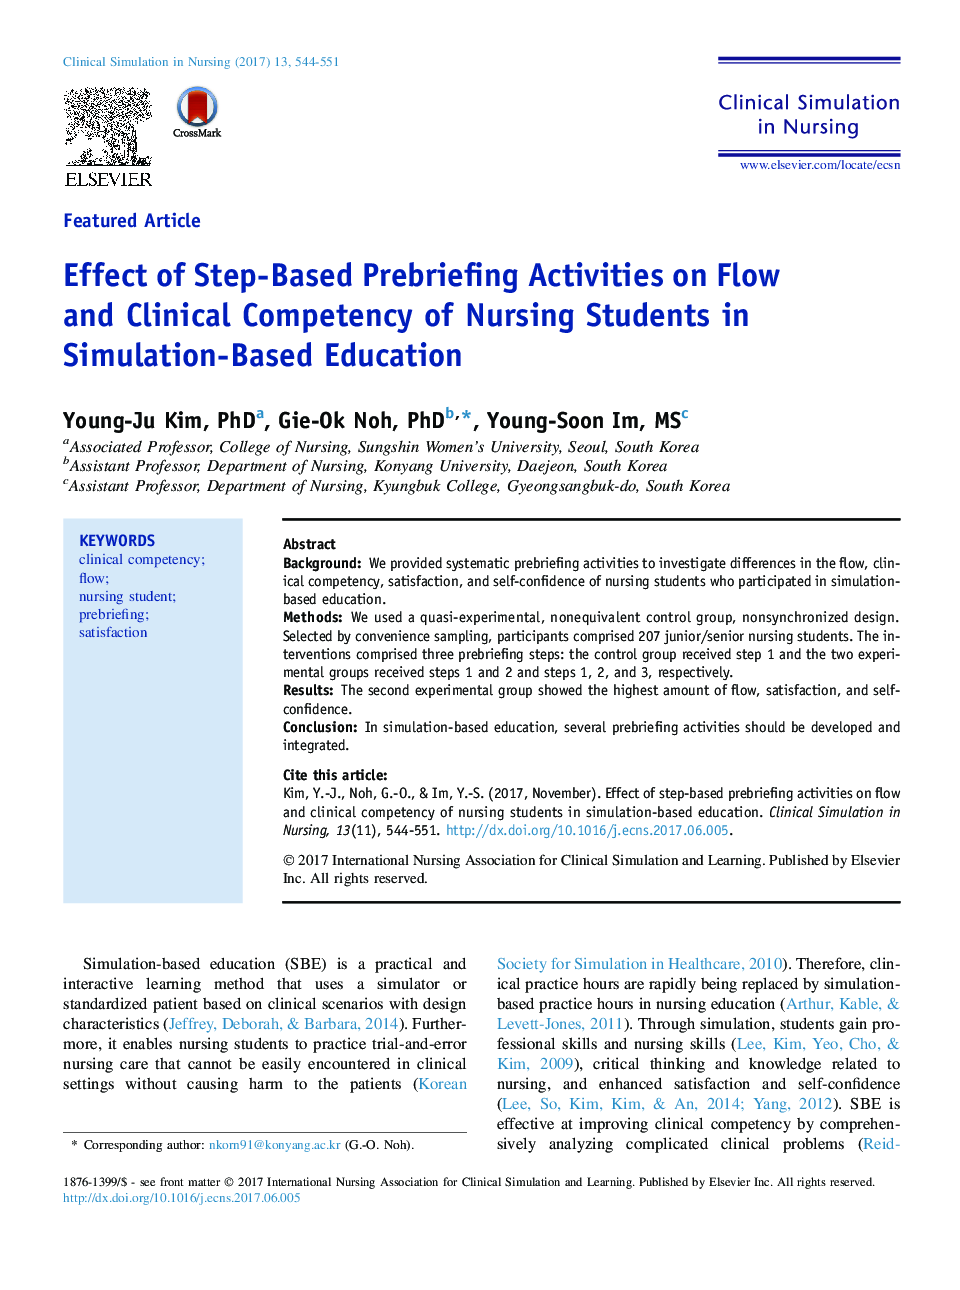 Effect of Step-Based Prebriefing Activities on Flow and Clinical Competency of Nursing Students in Simulation-Based Education